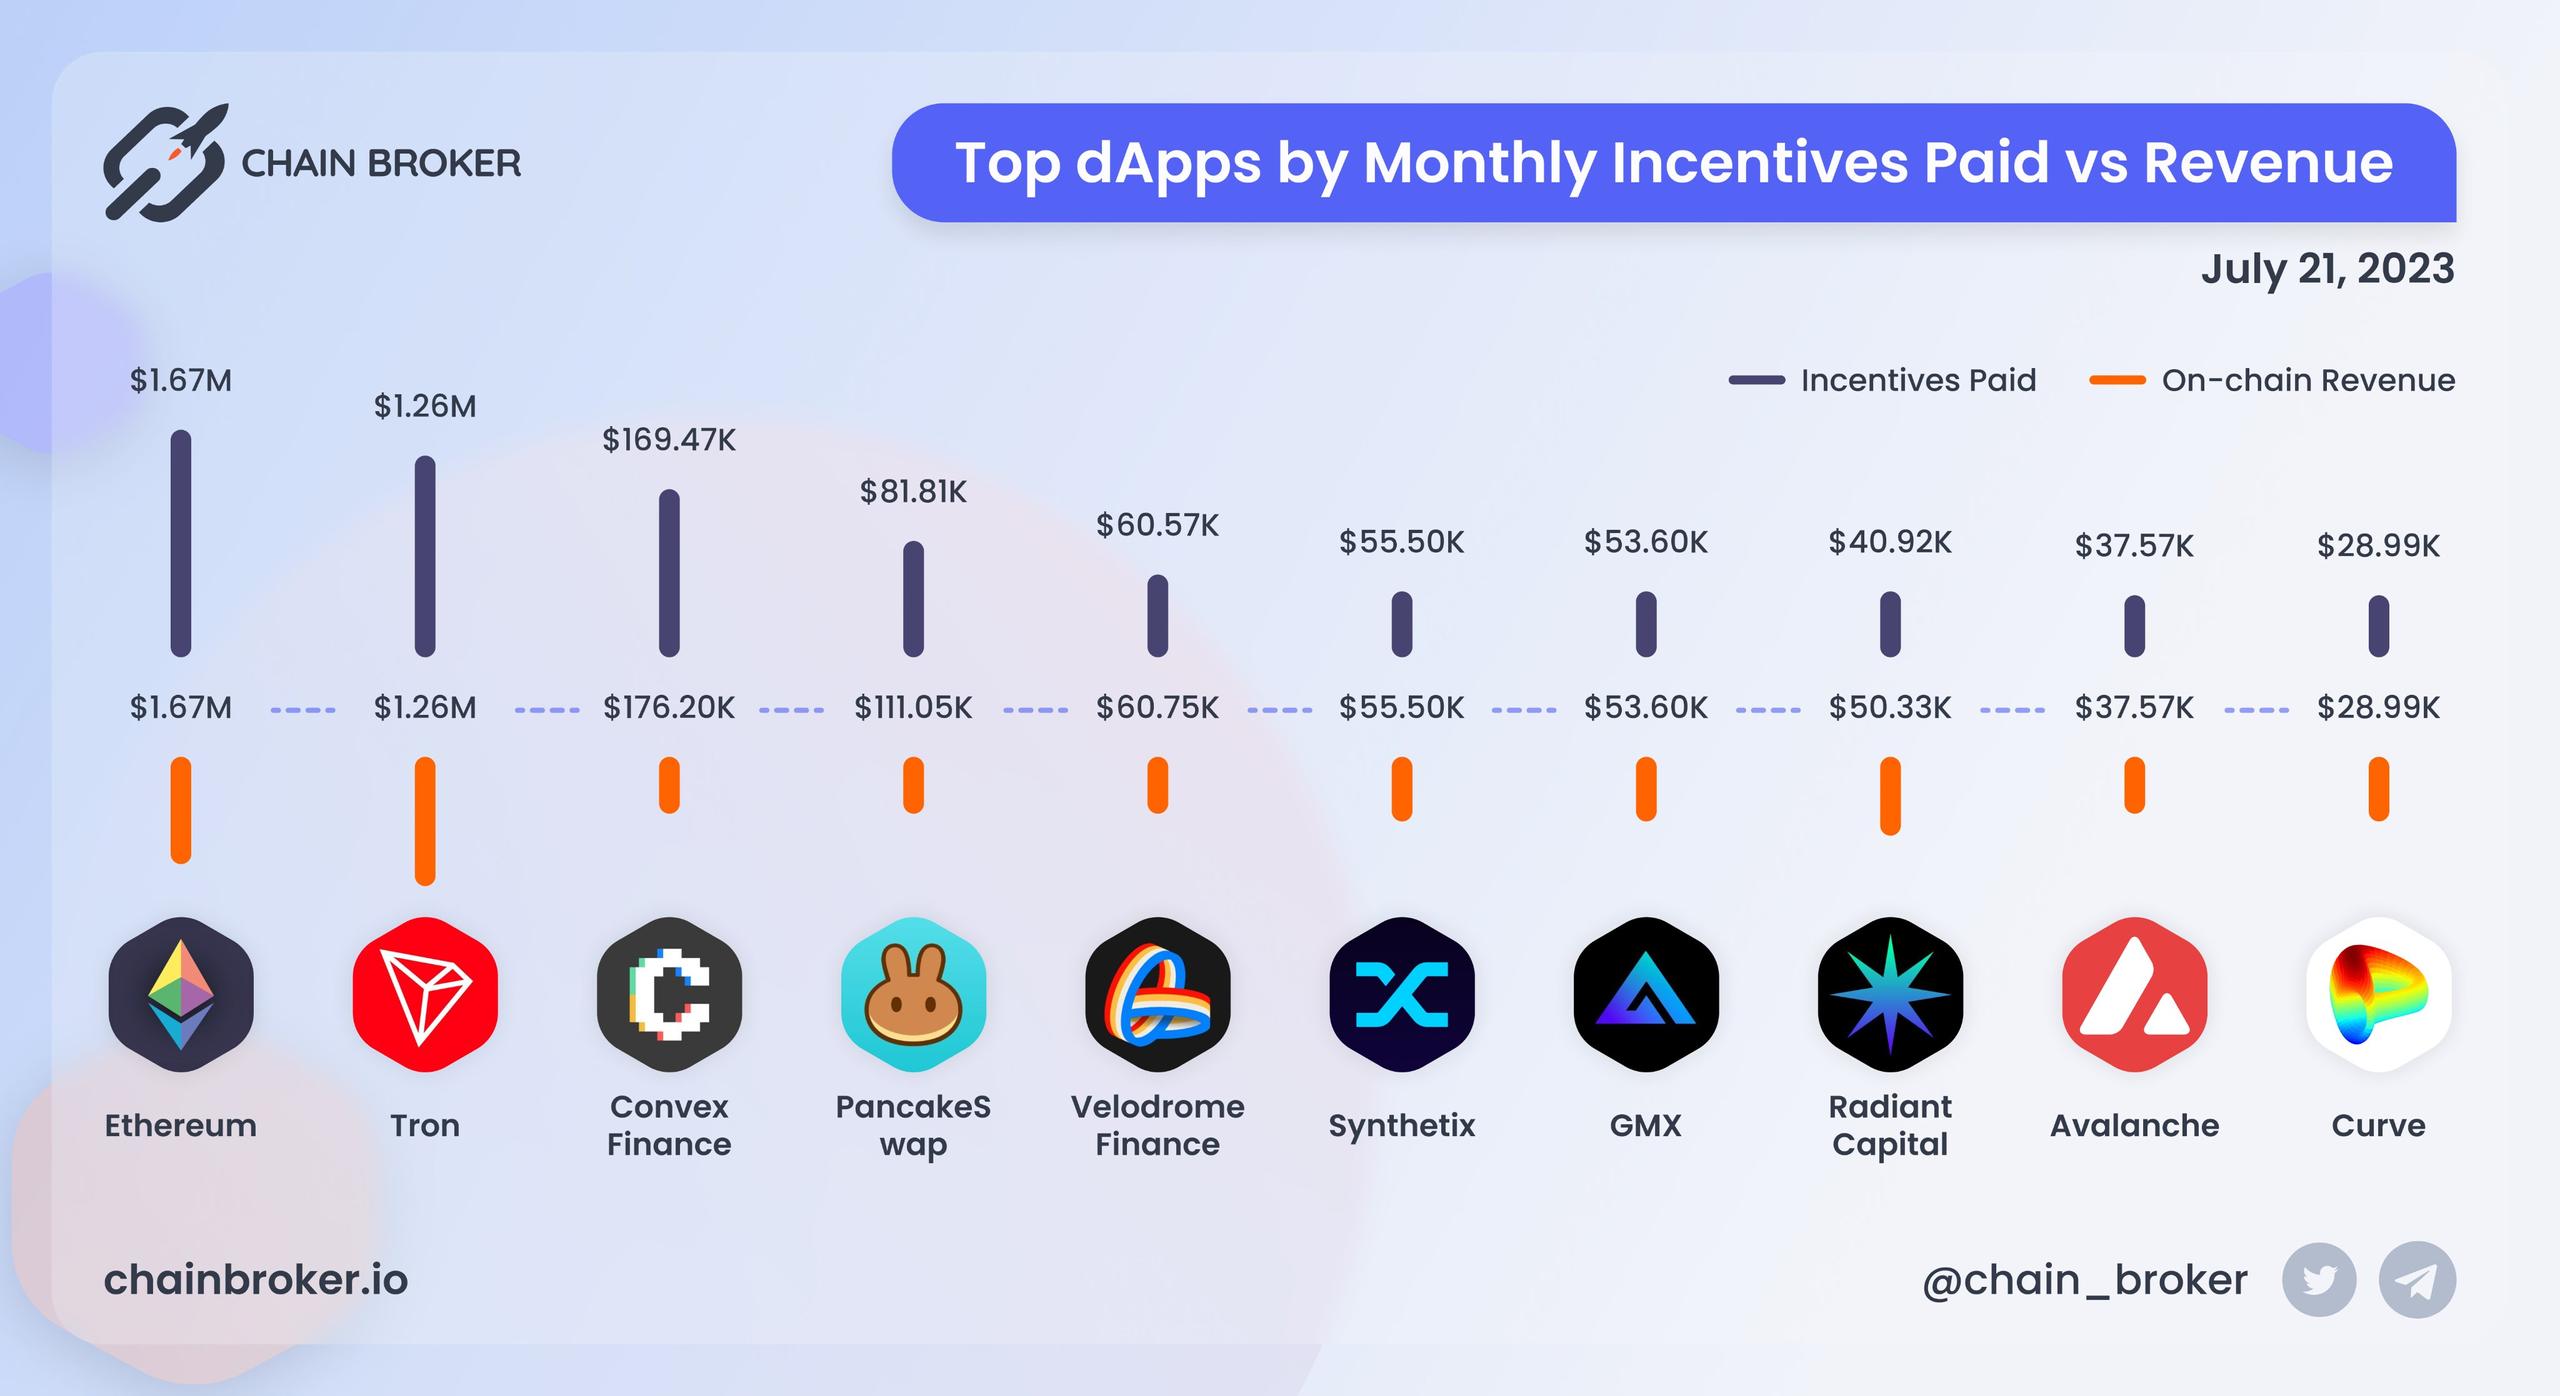 Top dApps by monthly on-chain Incentives